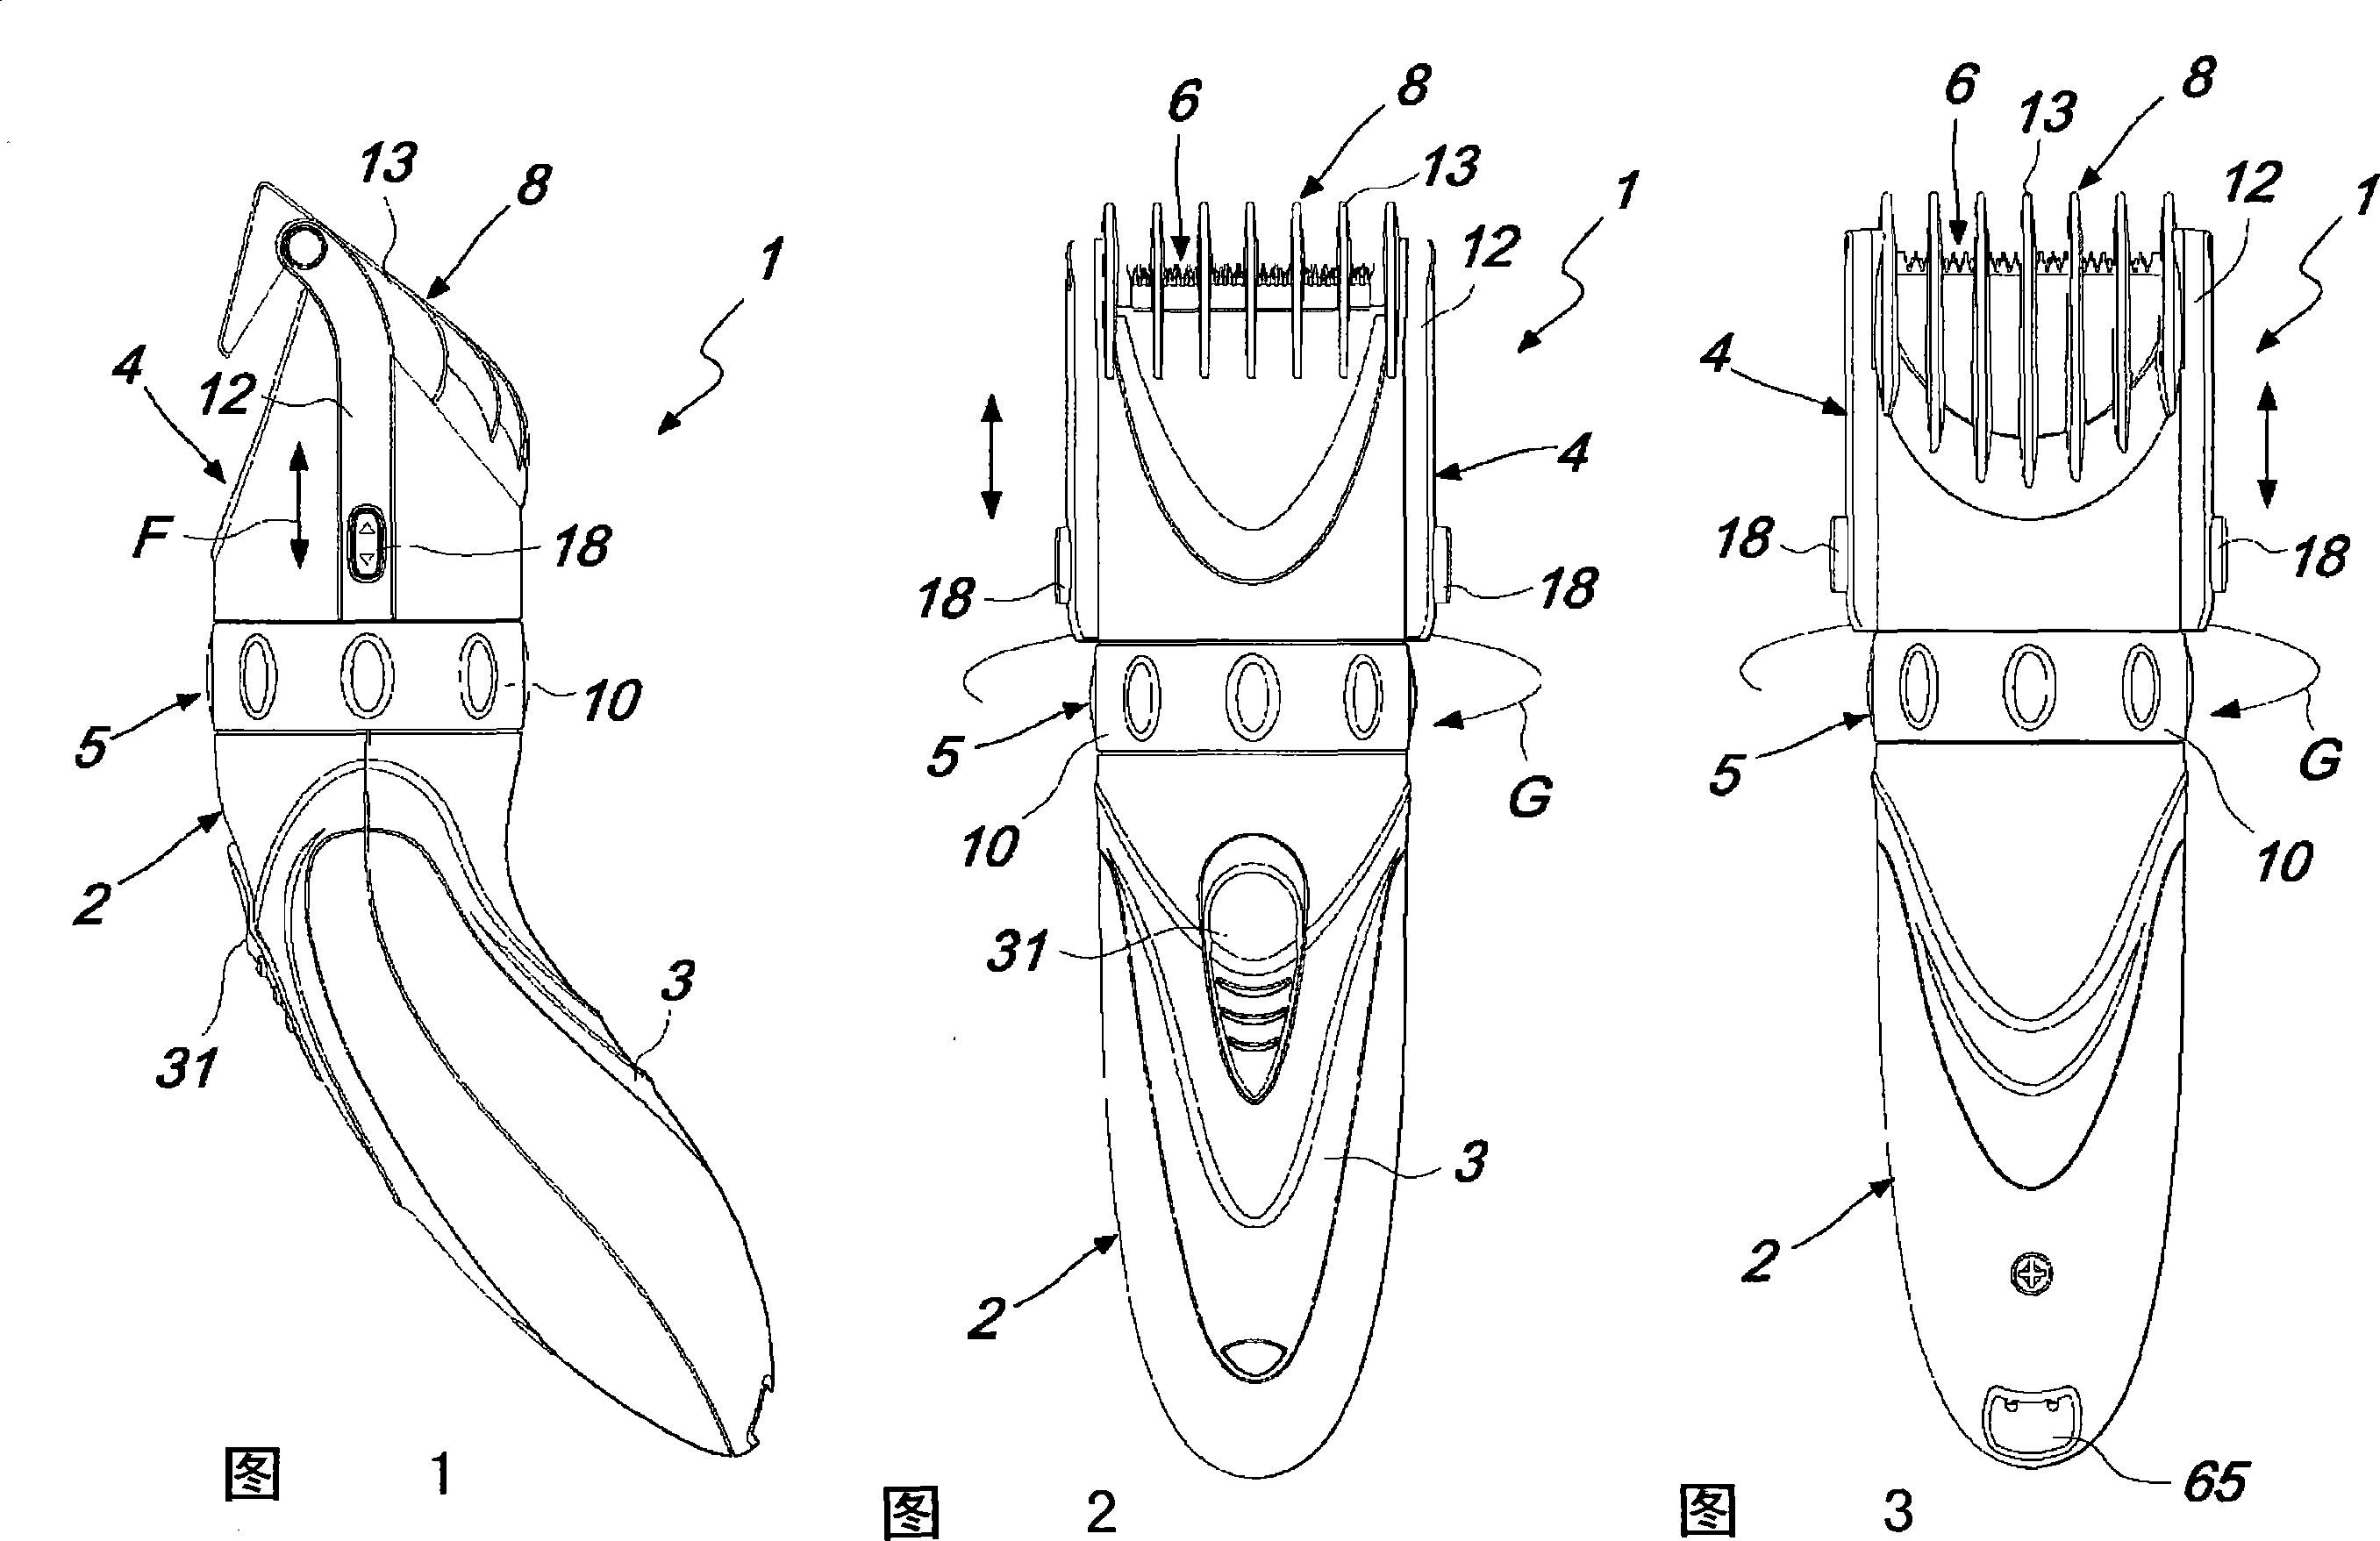 Manually-operated hair clipper